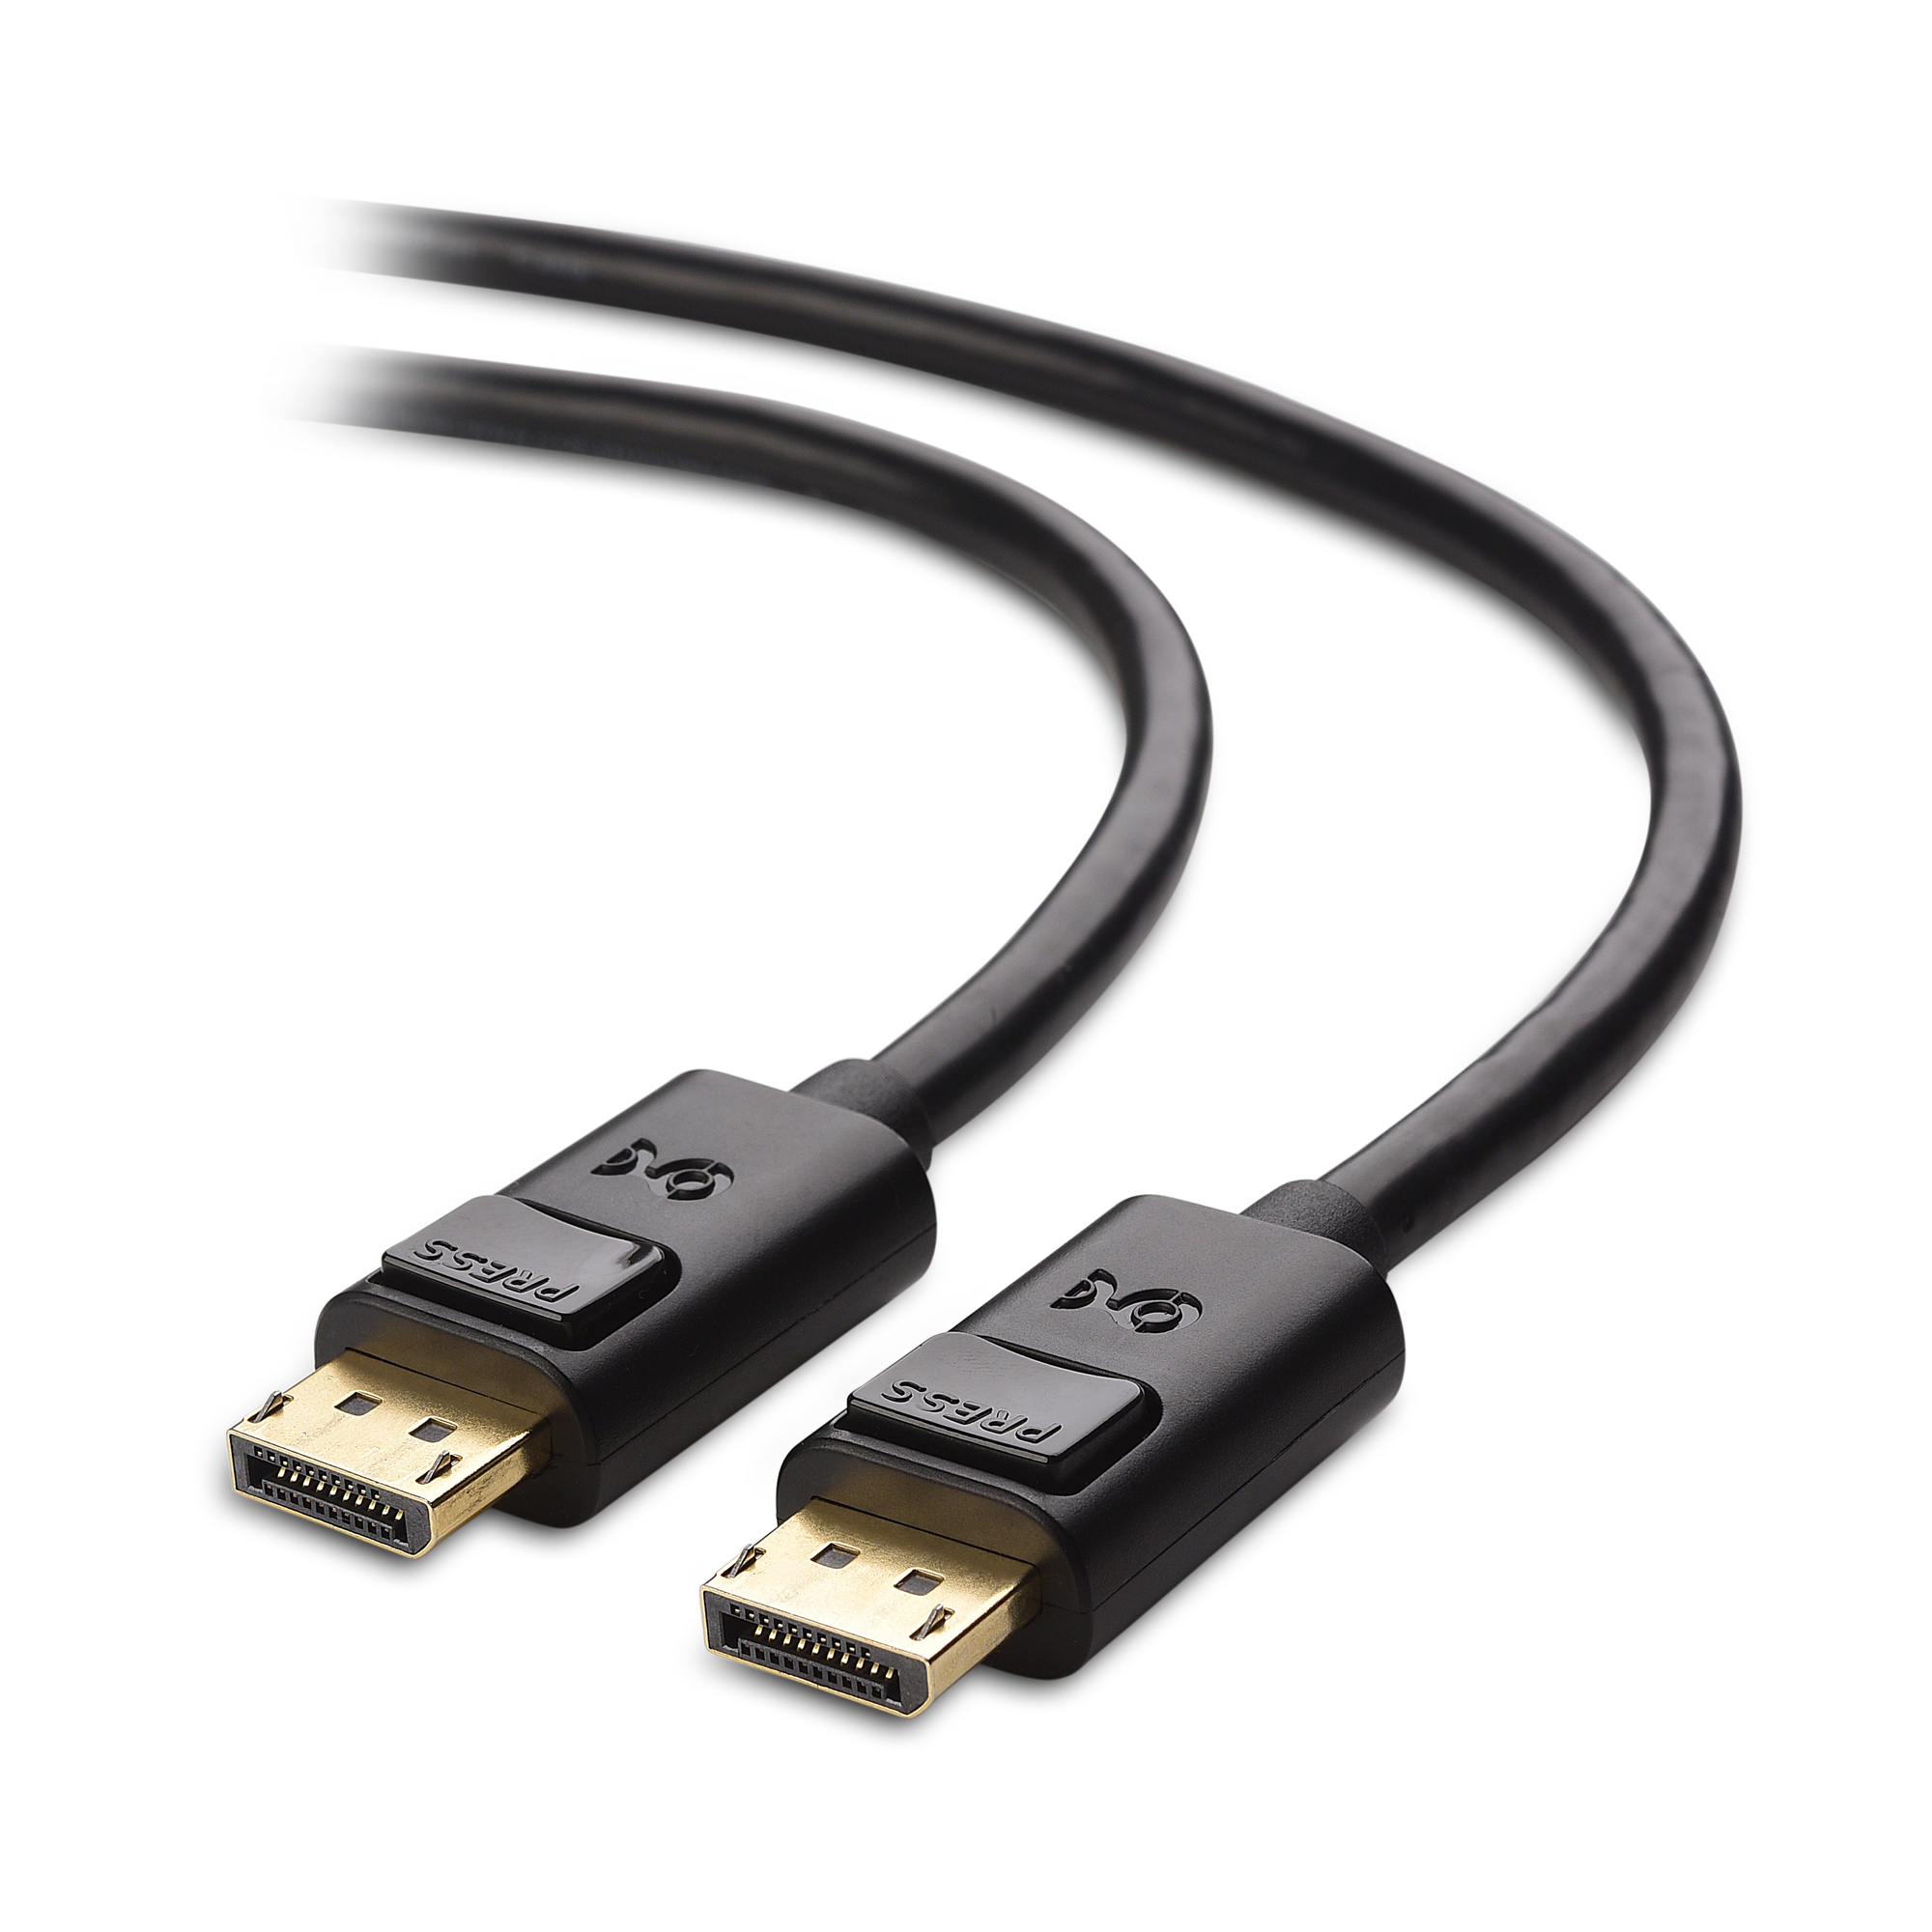 Cable Matters [VESA Certified] 3 ft 32.4Gbps DisplayPort Cable 1.4, Support  8K 60Hz, 4K 144Hz (DisplayPort 1.4 Cable) with FreeSync, G-SYNC and HDR